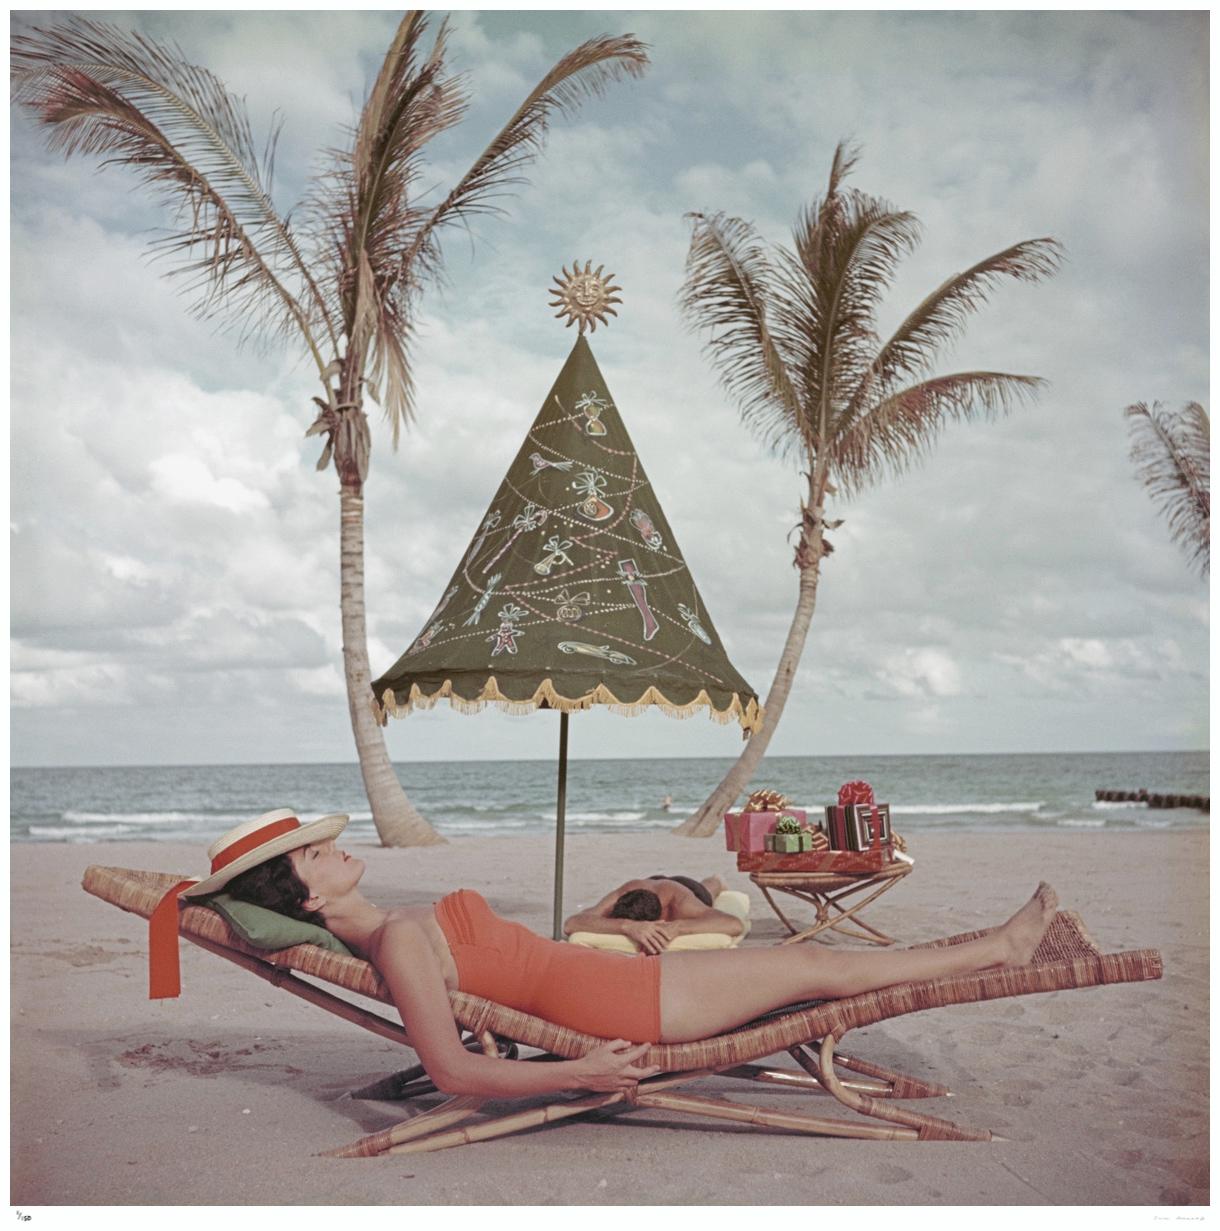 Slim Aarons - Palm Beach Idyll- Estate Stamped Edition 
Limited to 150 only 
A couple sunbathe by the sea at Palm Beach Florida 1955 USA (Photo by Slim Aarons). 

This photograph epitomises the travel style and glamour of the period's wealthy and